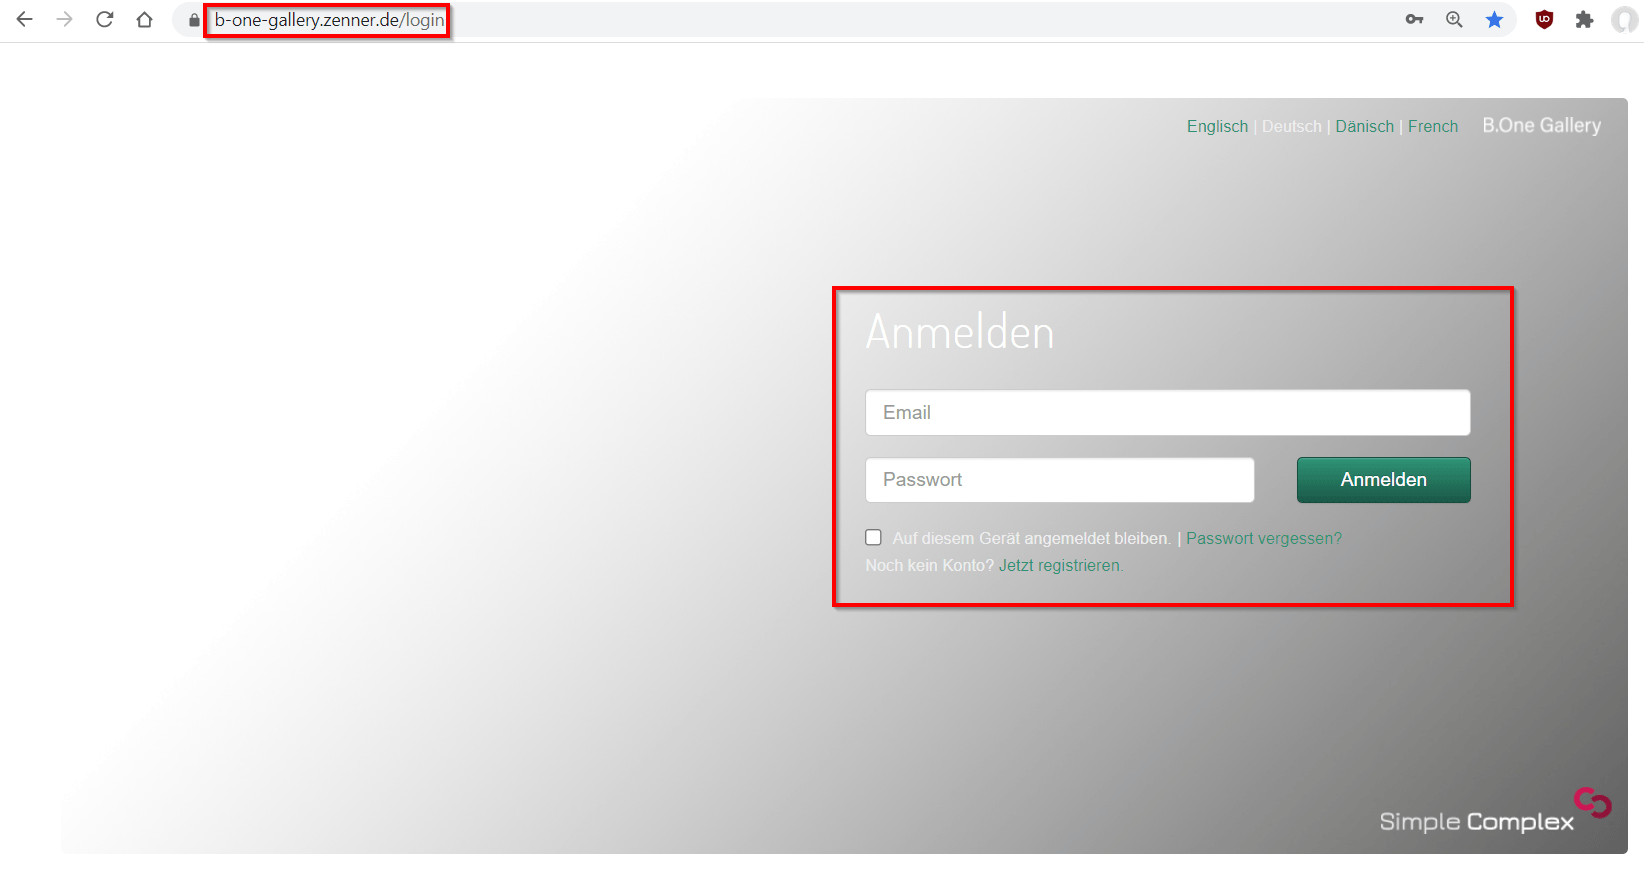 Login page of the B.One Gallery for log-in and registration